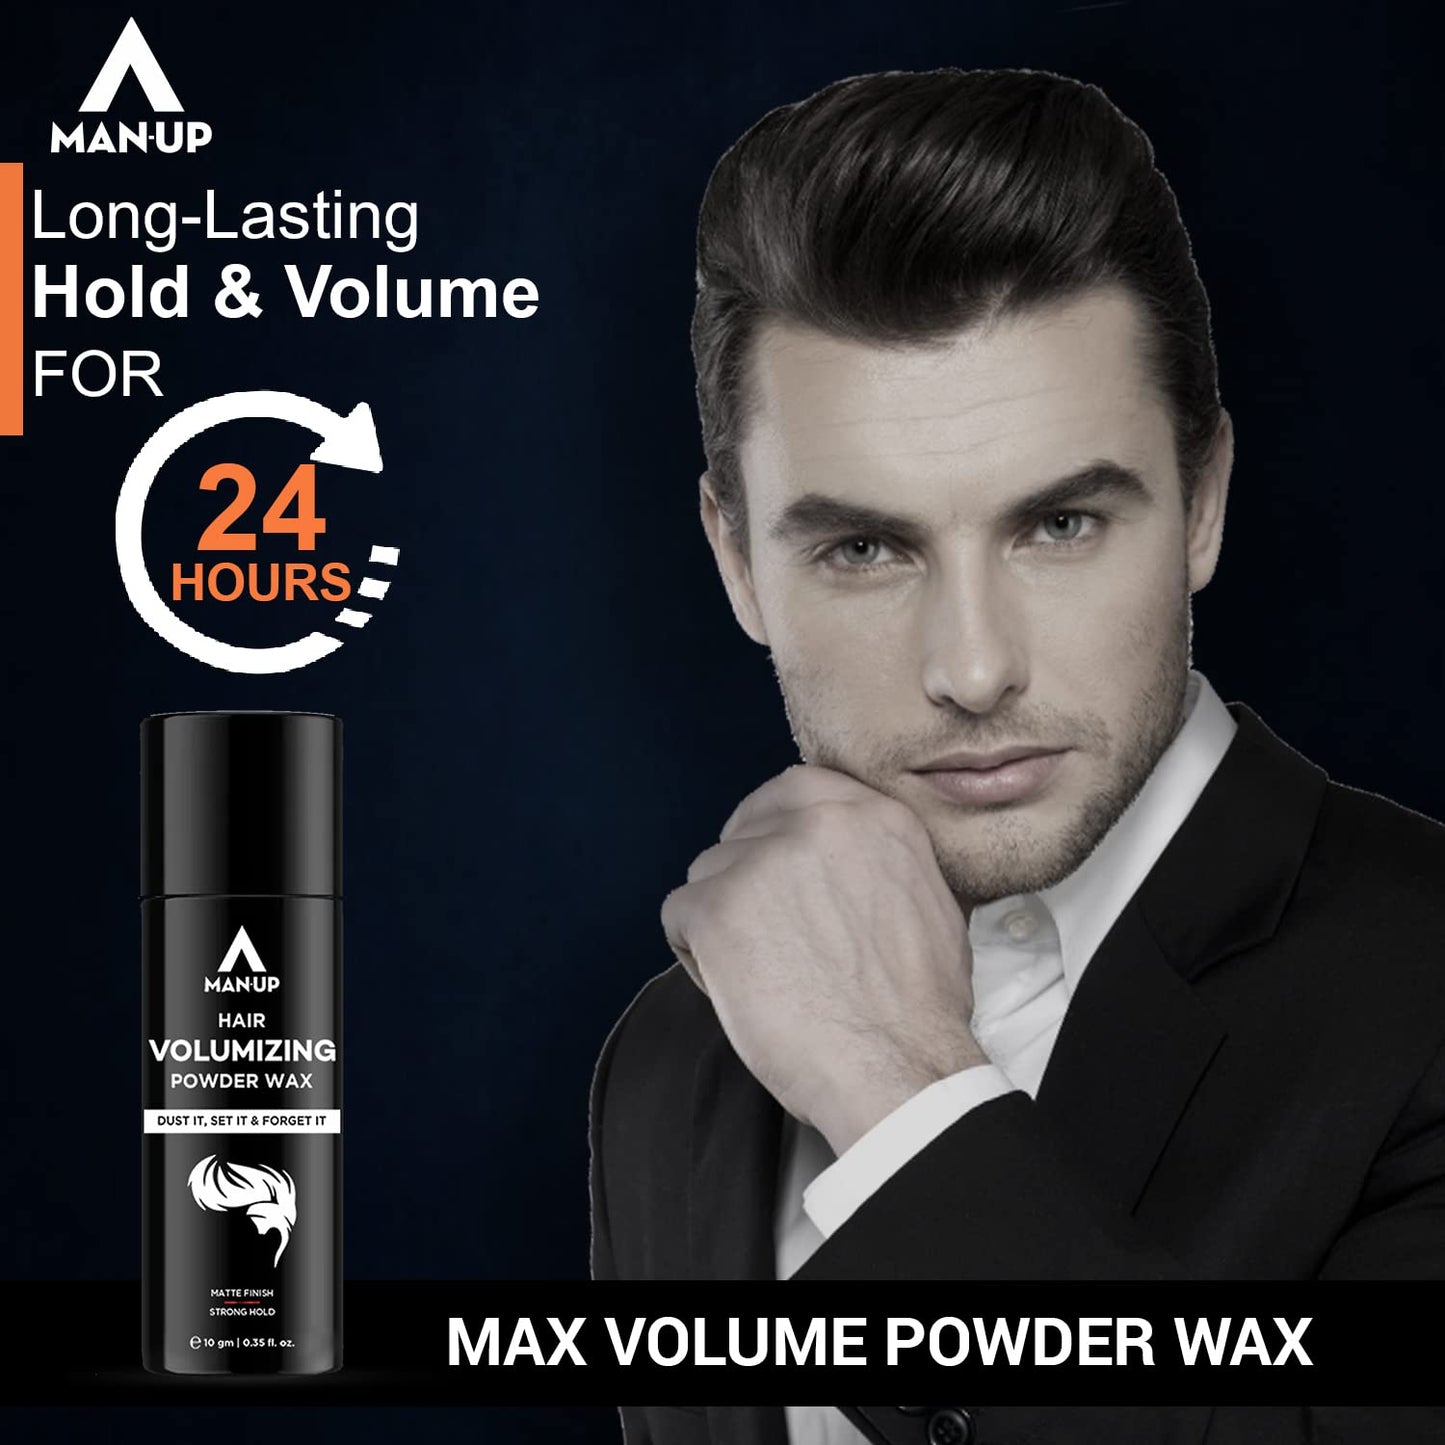 Man-Up Hair Volumizing Powder Wax For Men  Strong Hold With Matte Finish Hair Styling  All Natural Hair Styling Powder  For All Hair Types - 10gm Pack of 2